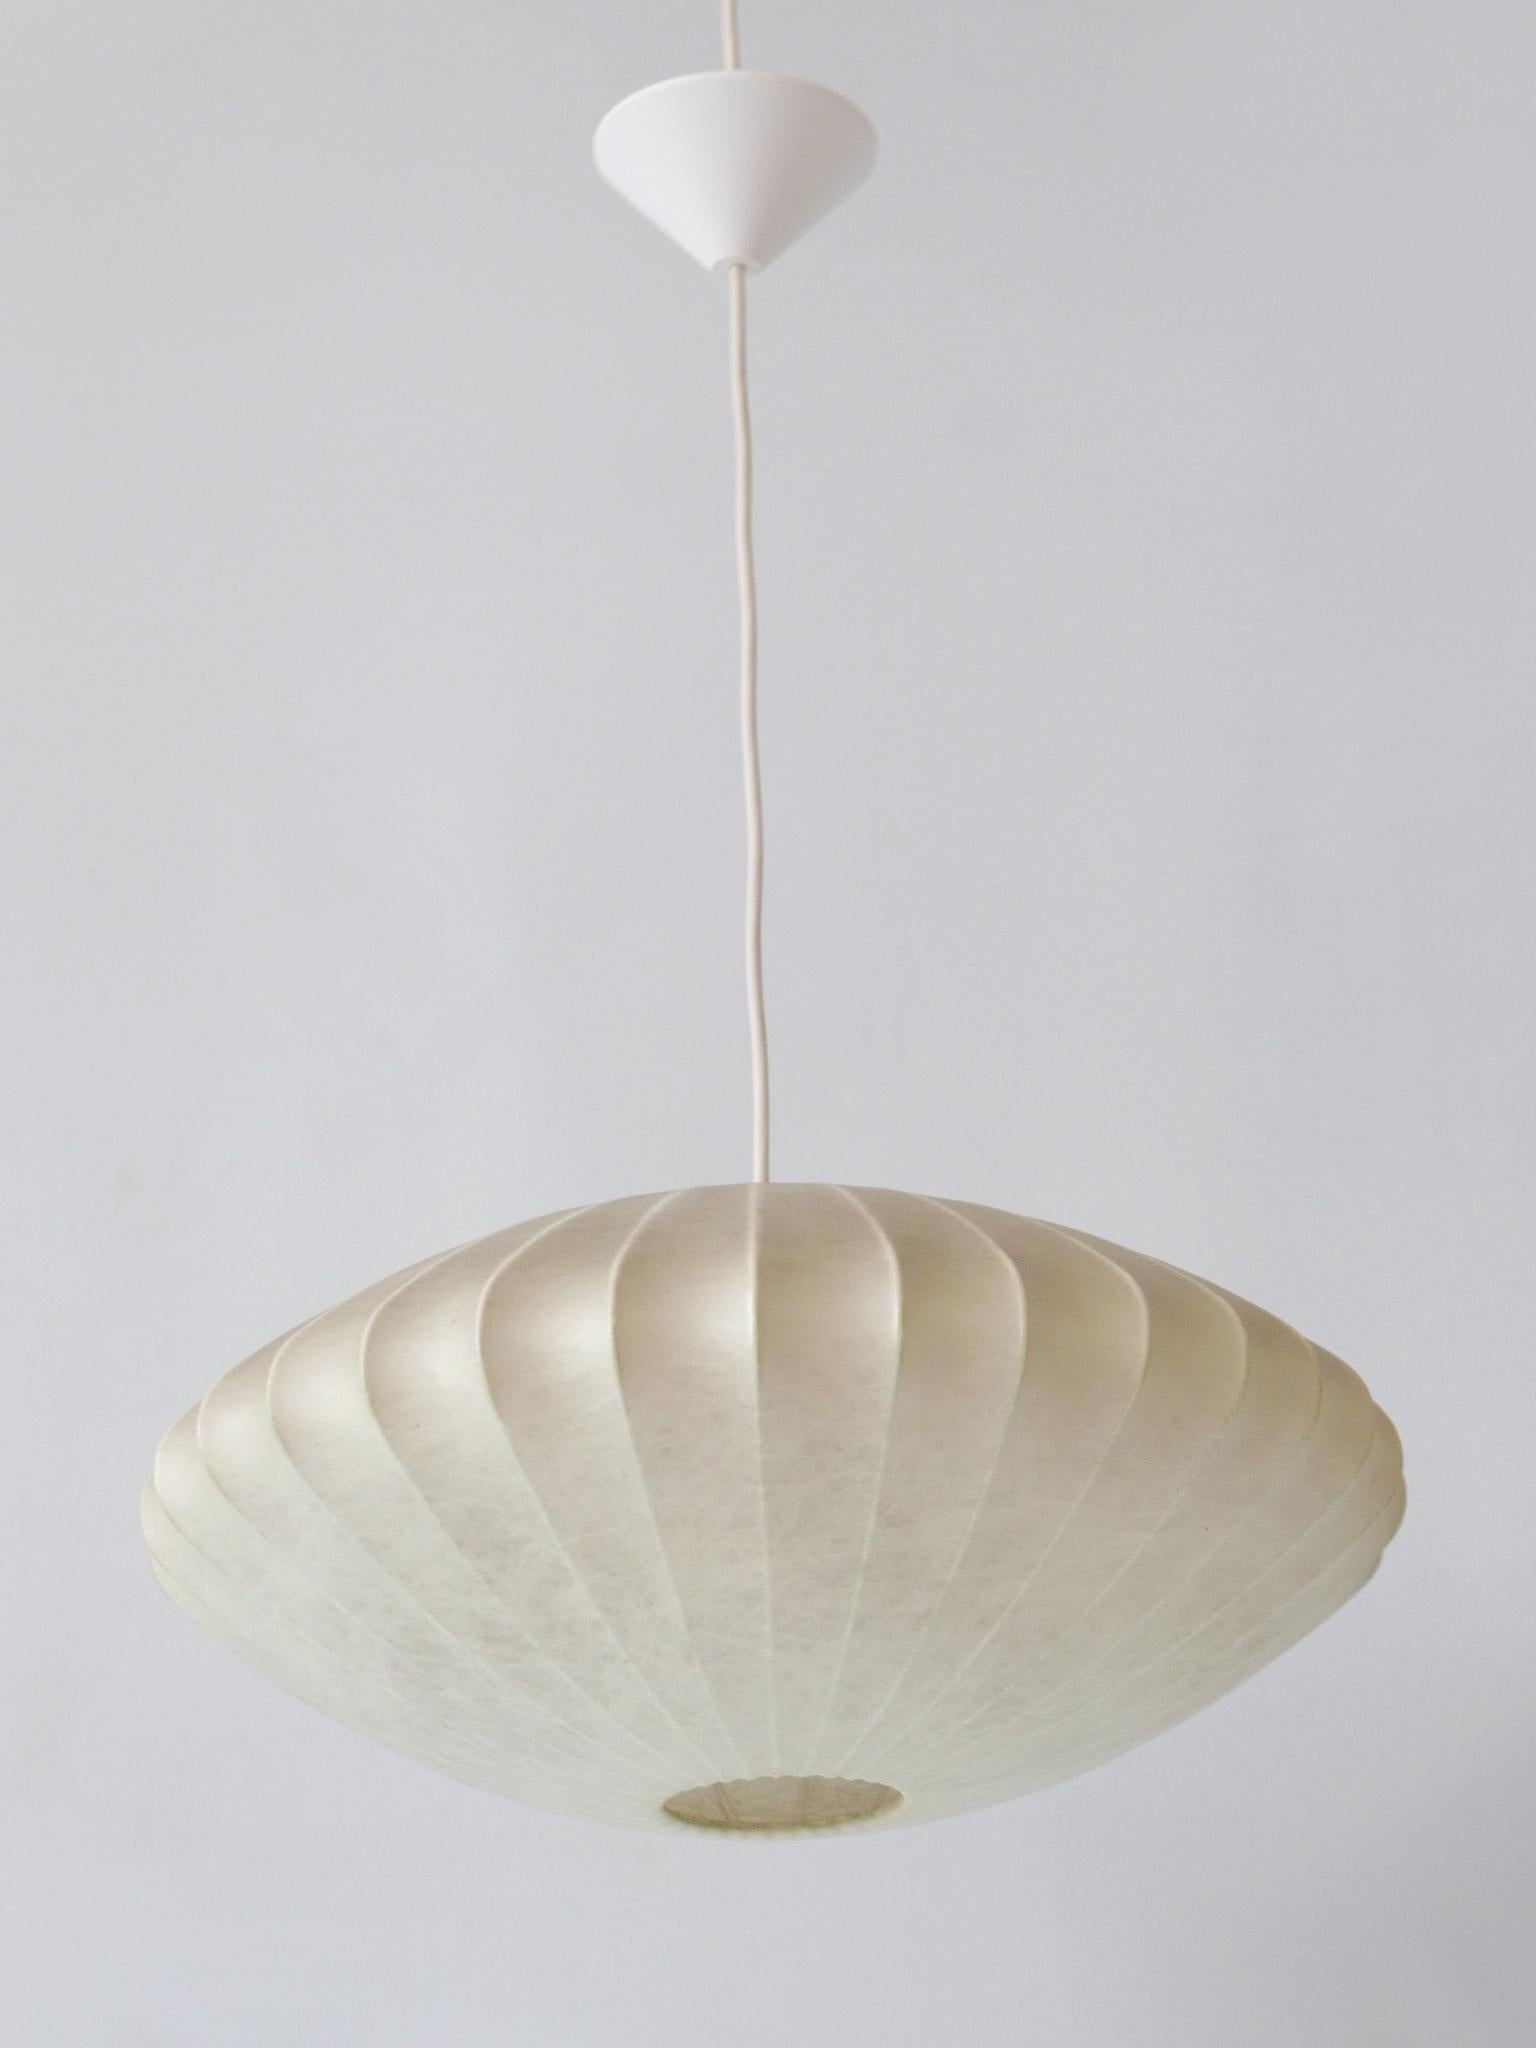 German Rare Mid-Century Modern Cocoon Pendant Lamp or Hanging Light by Goldkant 1960s For Sale